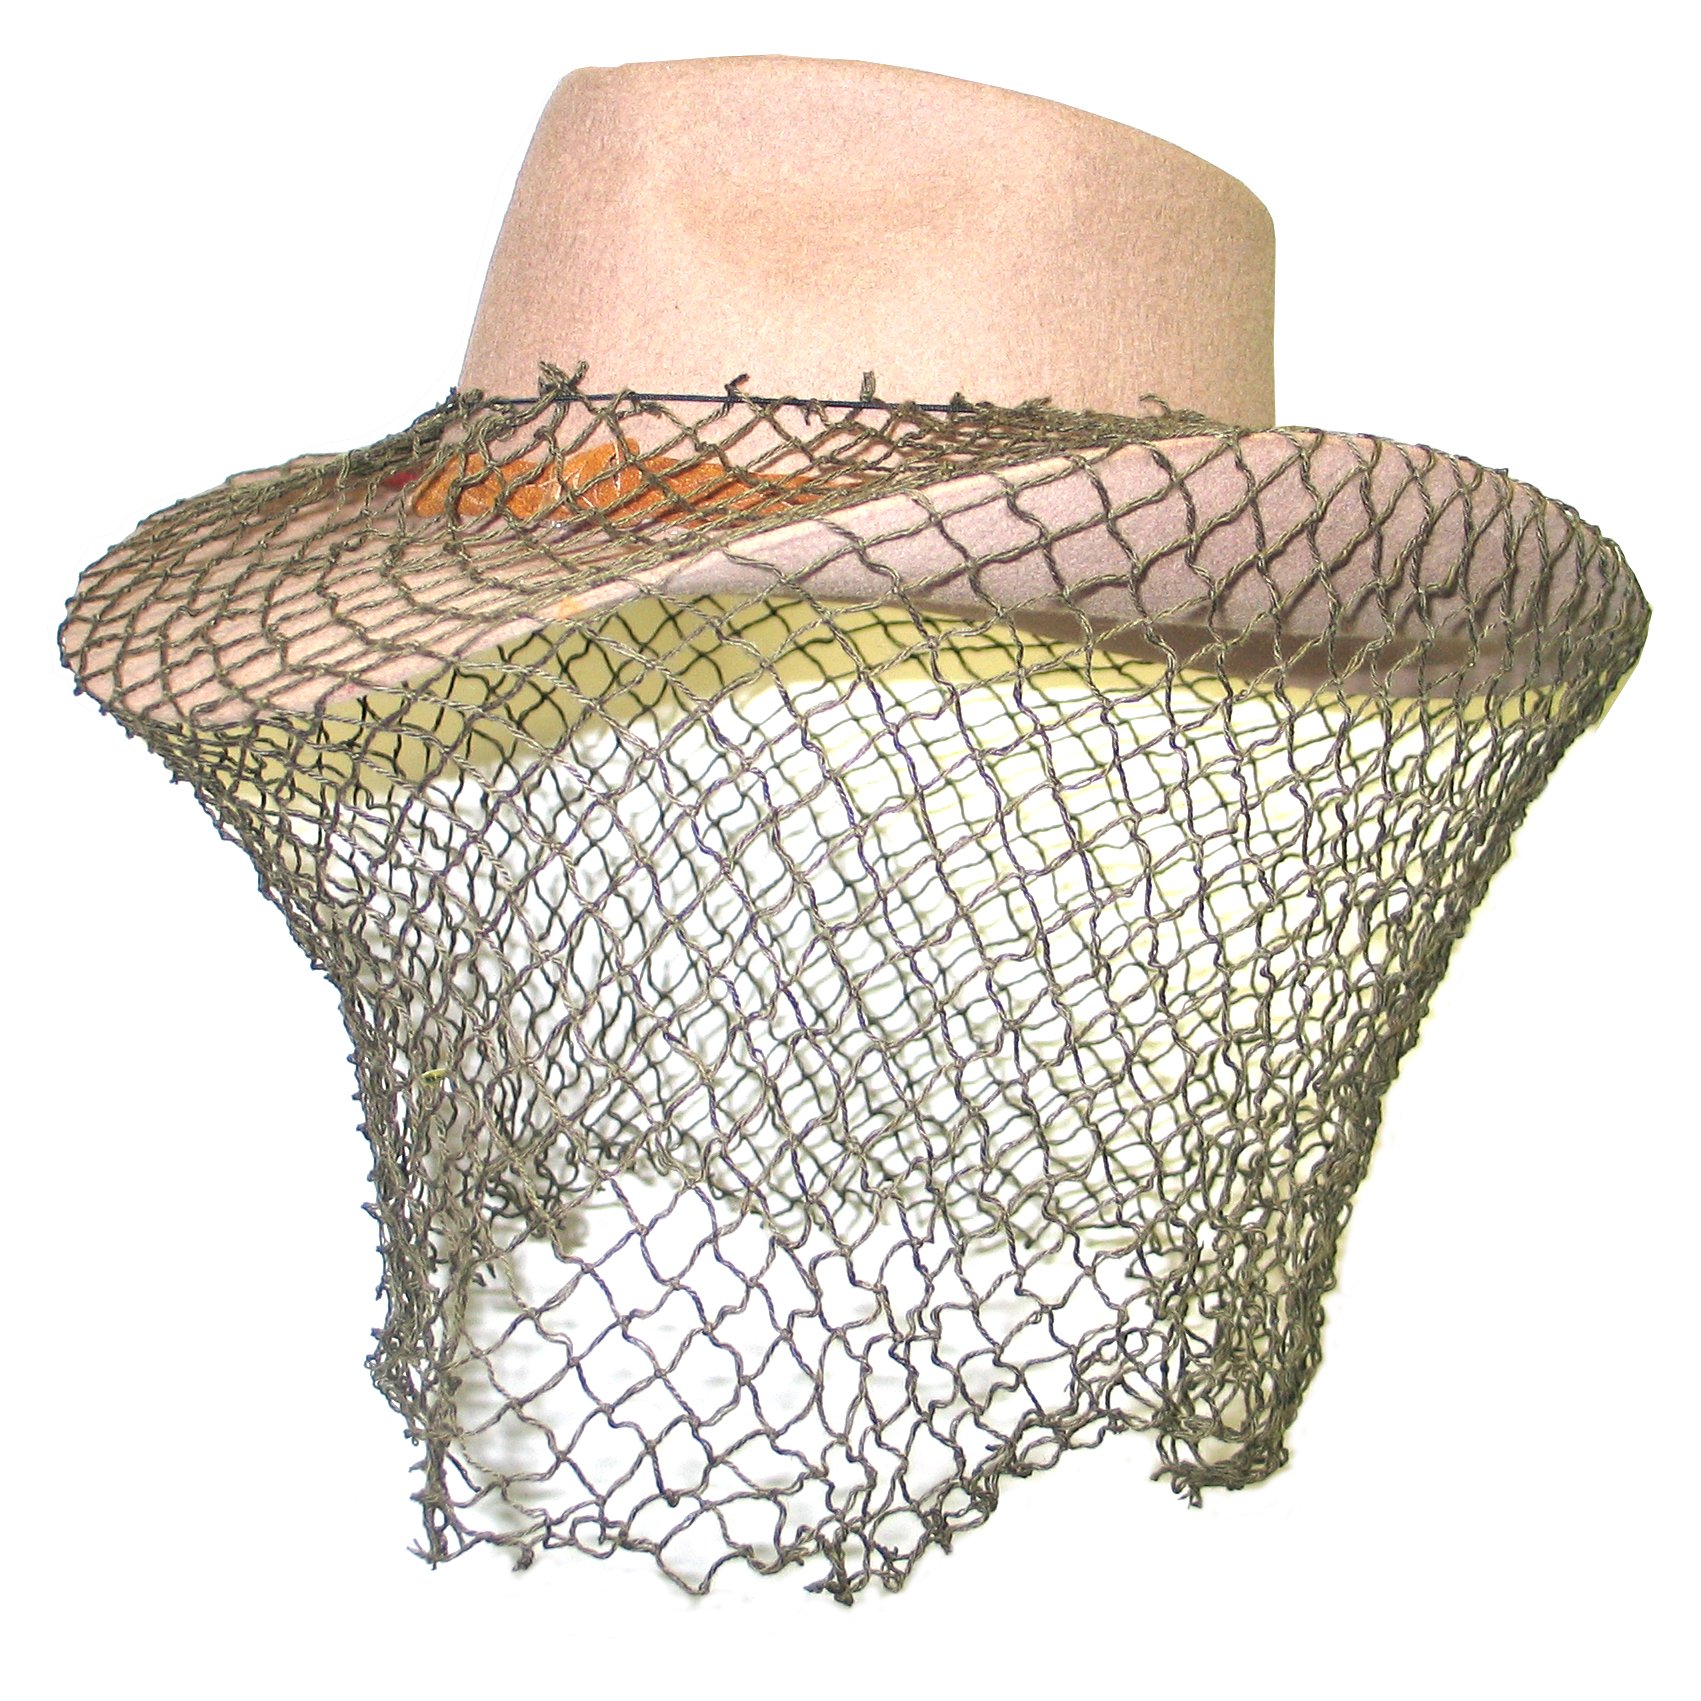 Open Weave Fly Net - OUTBOUND NEW : Mosquito Nets and Insect